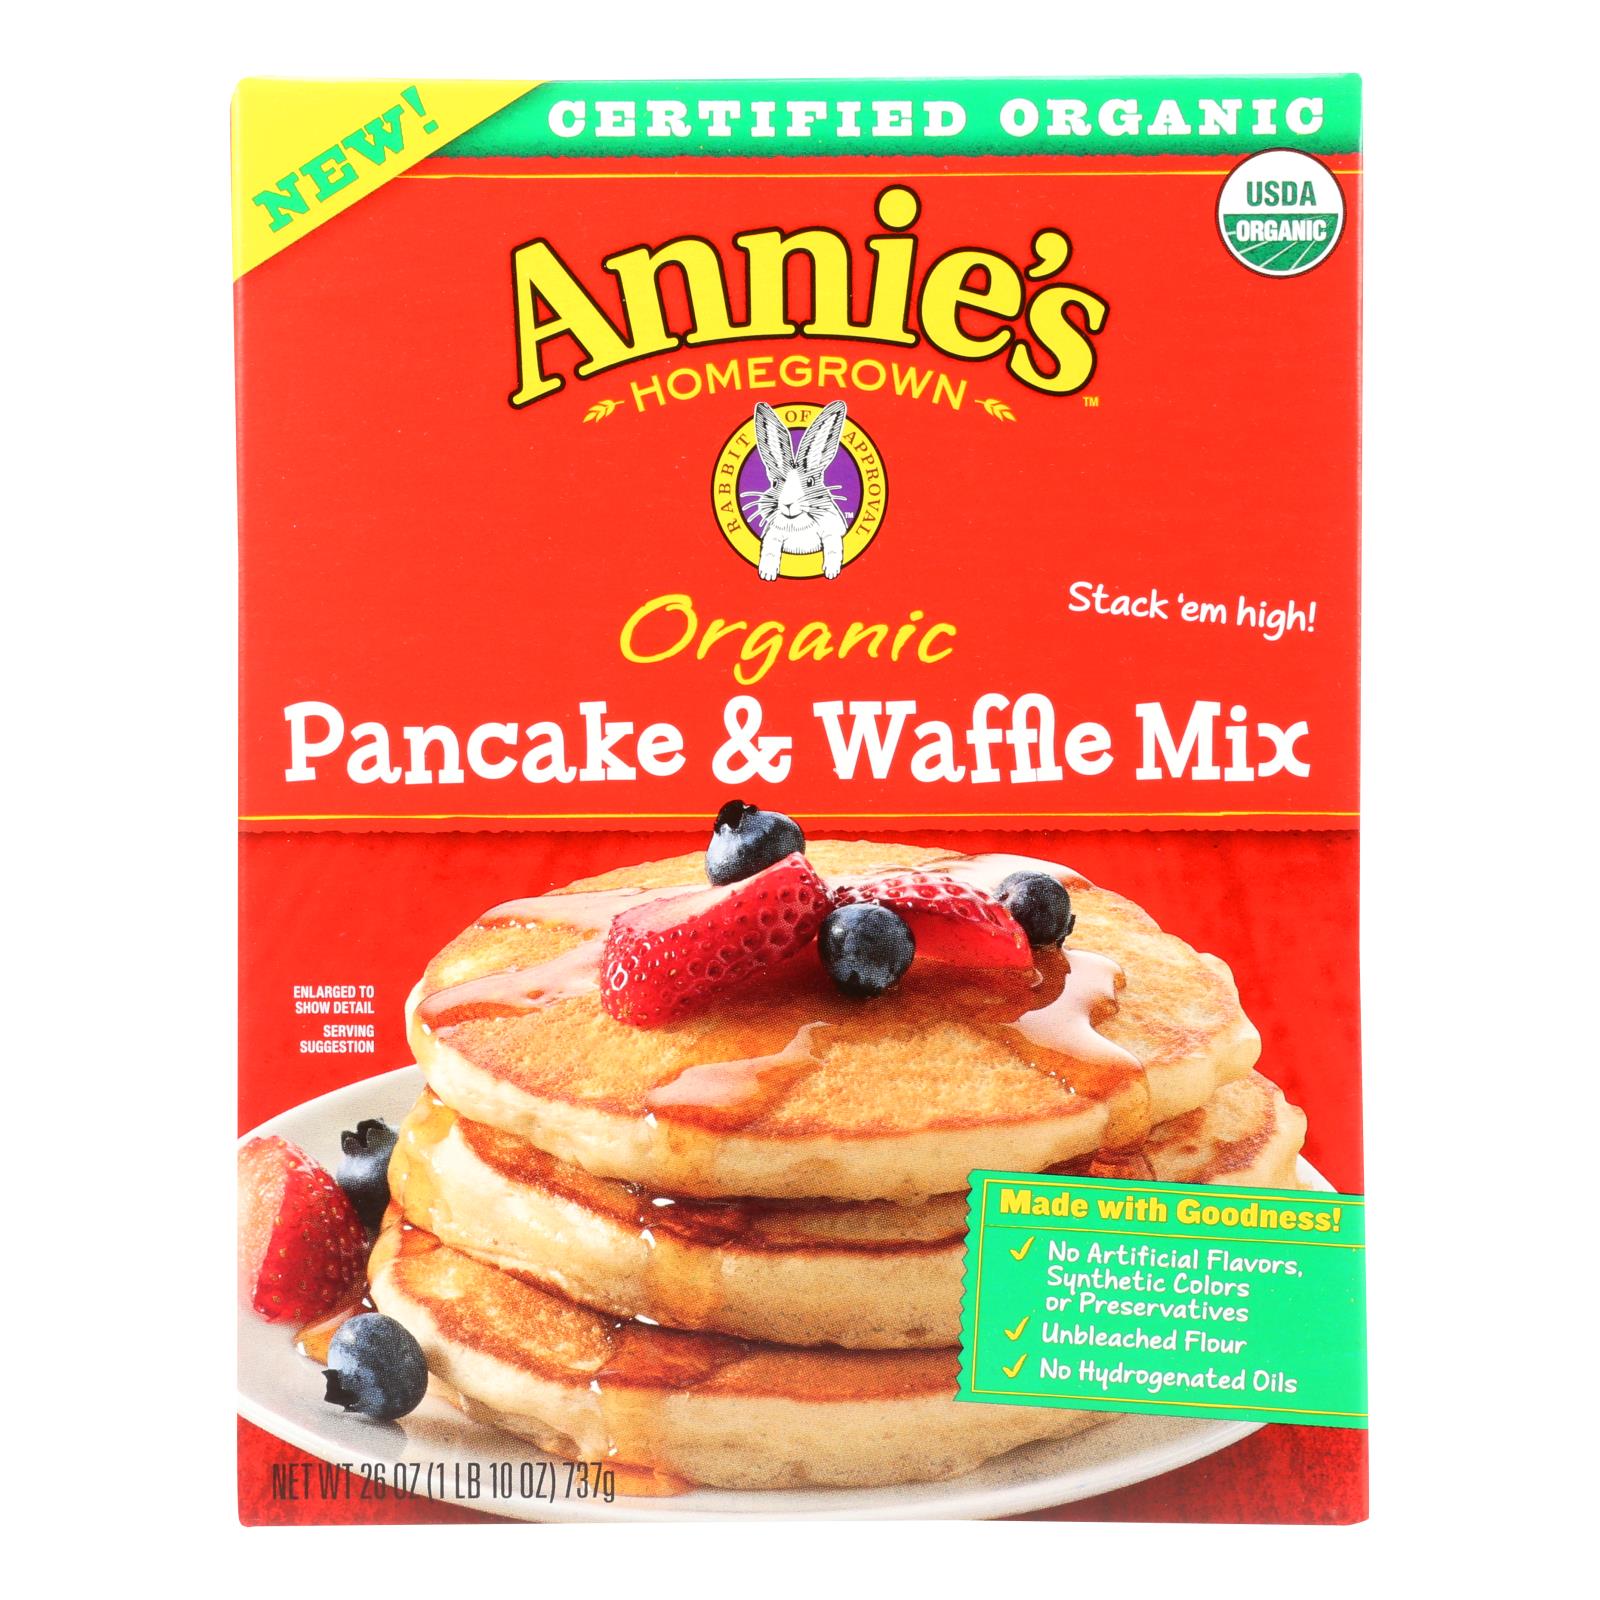 Annie's Homegrown, Make Annie's Organic Pancake & Waffle Mix And - Case of 8 - 26 OZ (Pack of 8)